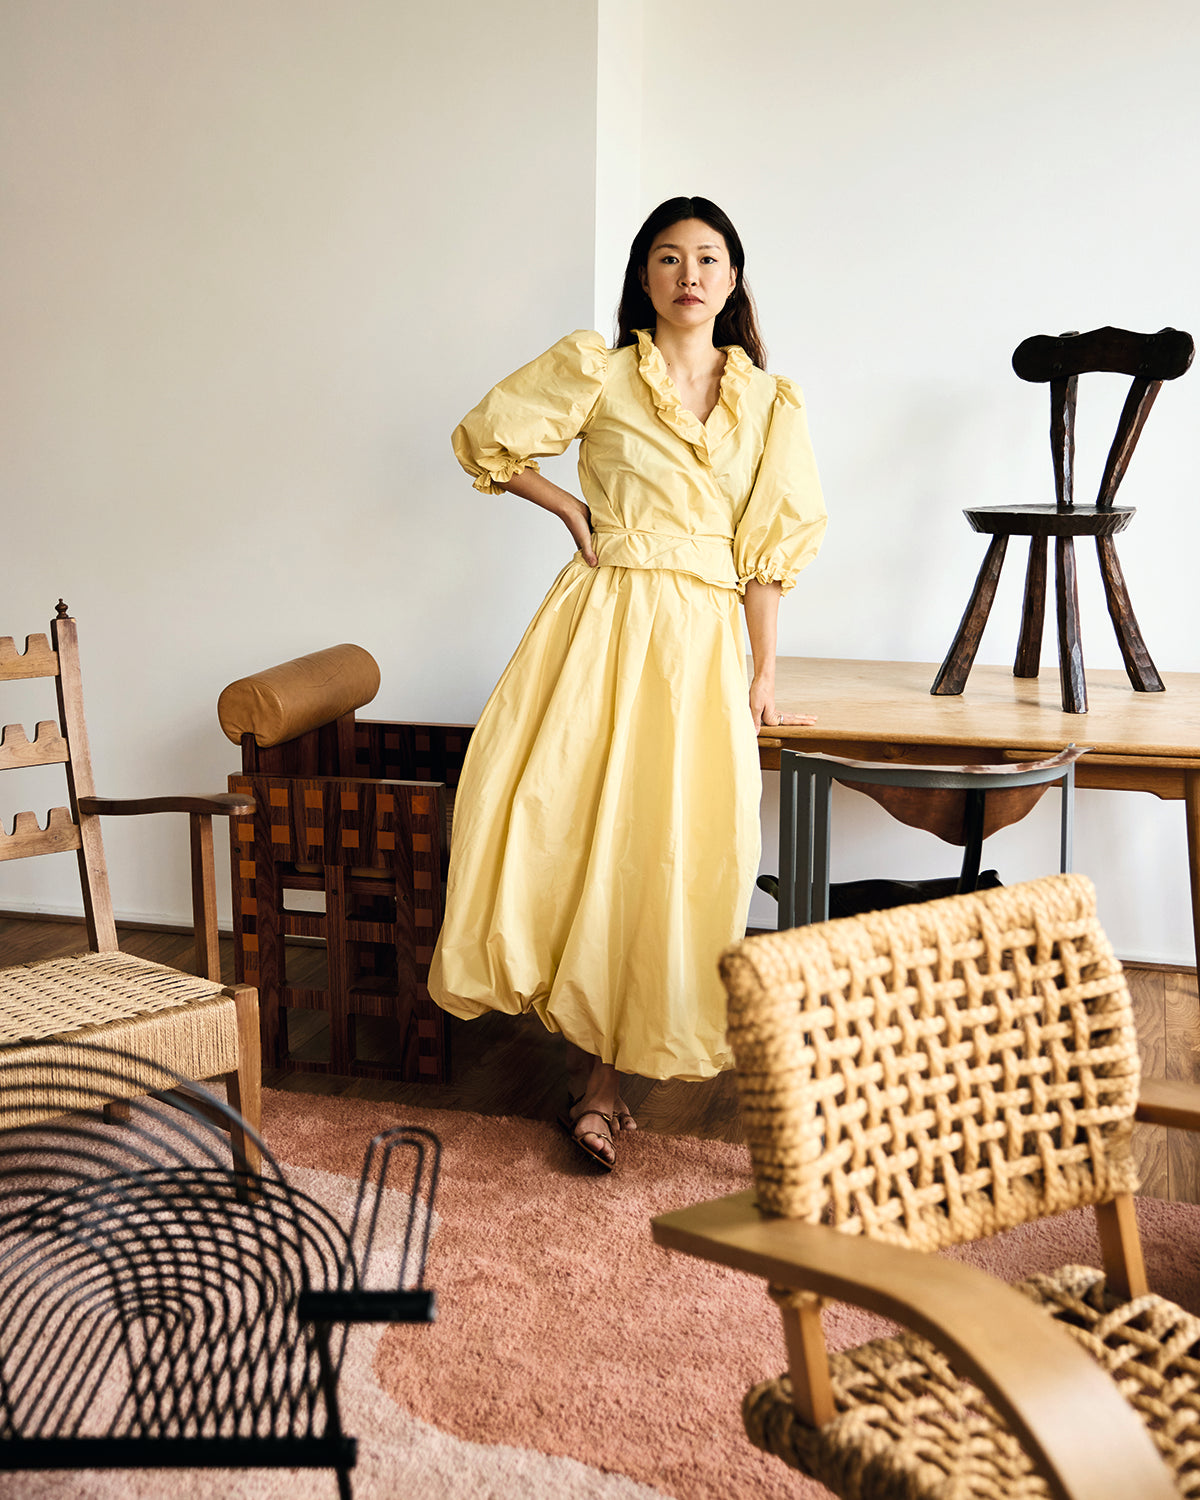 A Beginner’s Guide To Collecting Antiques - Rejina Pyo featured in British Vogue